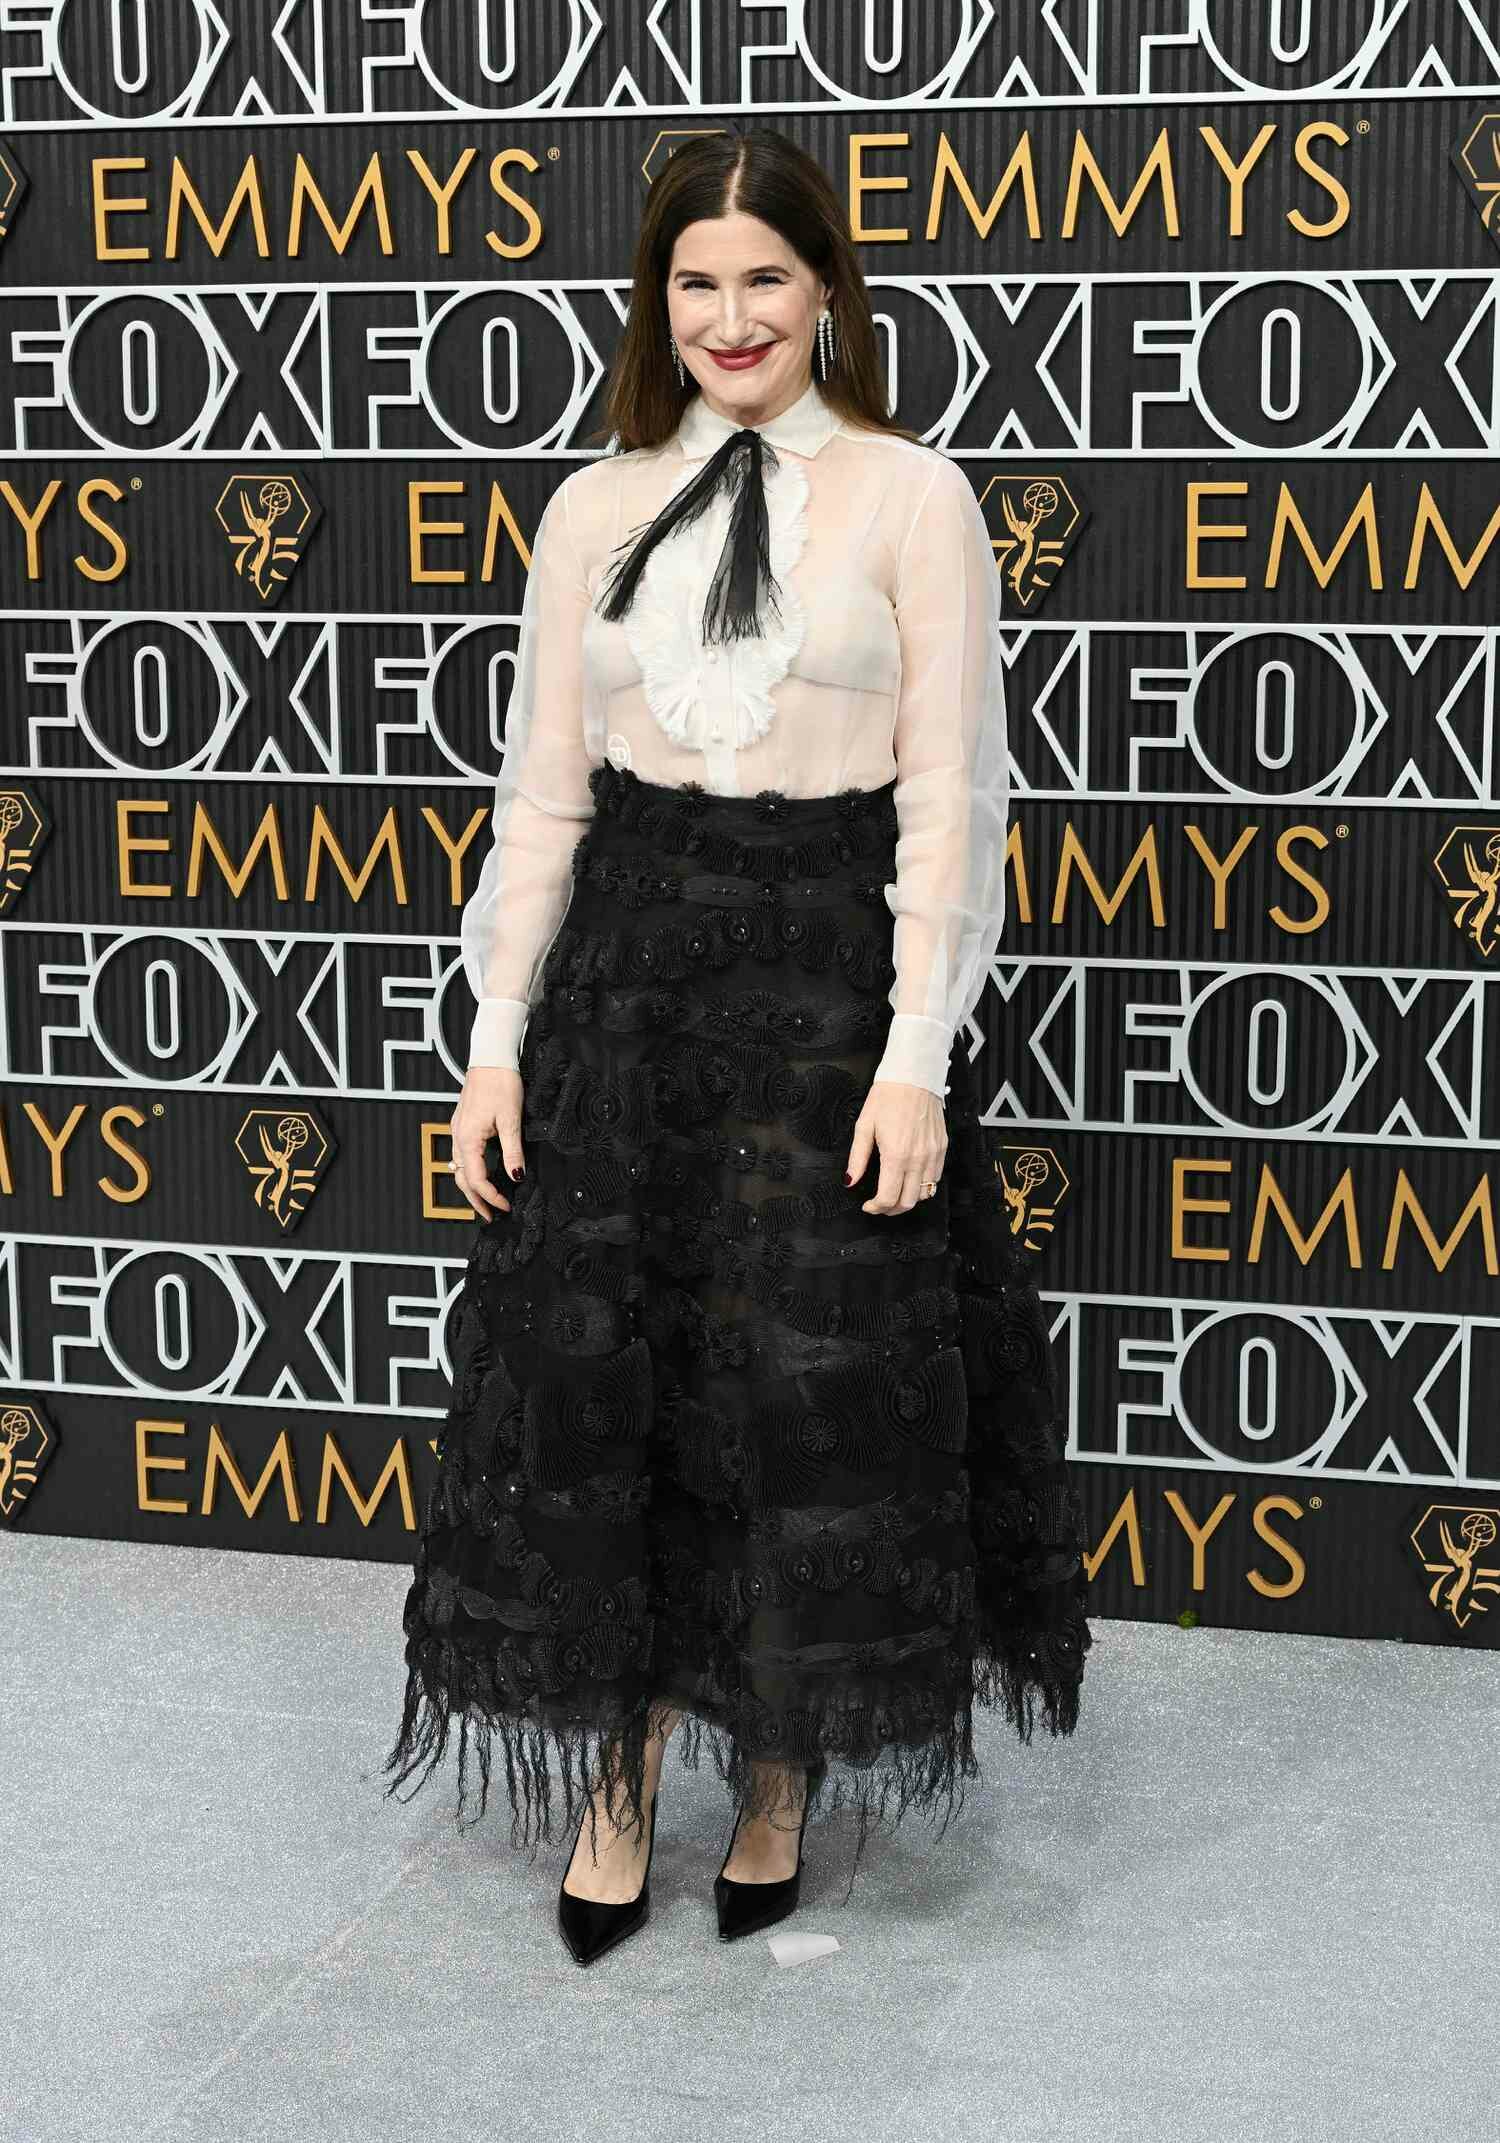 Kathryn Hahn at the Emmy Awards